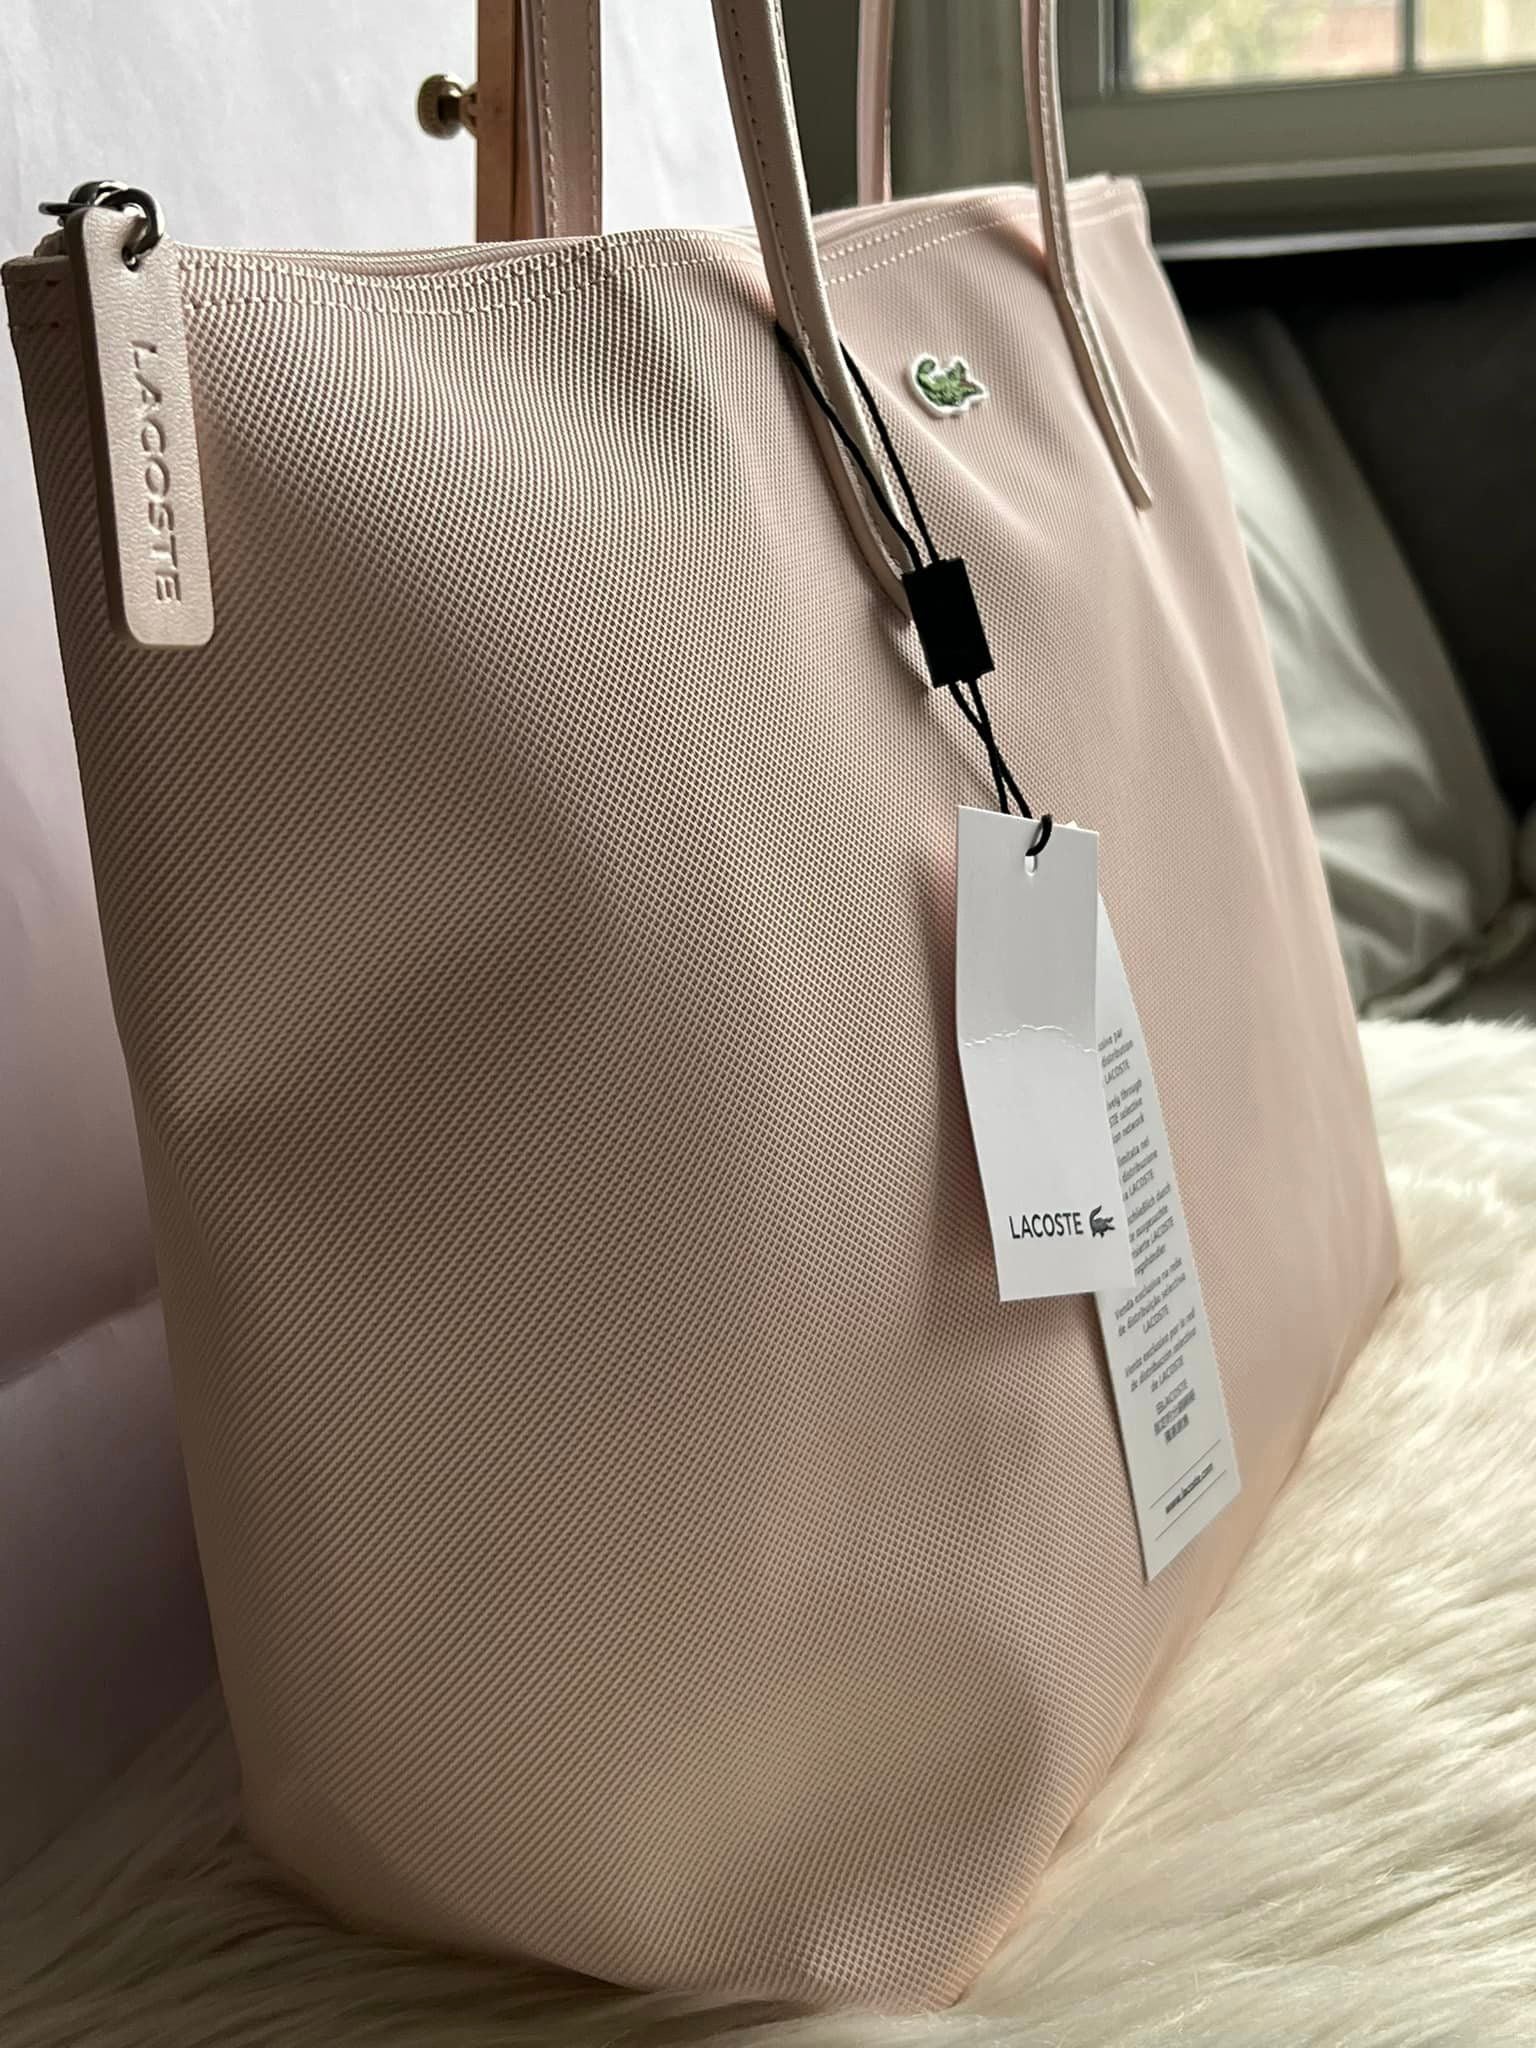 Lacoste Shopper - Large Shopping Bag - Passion » Quick Shipping